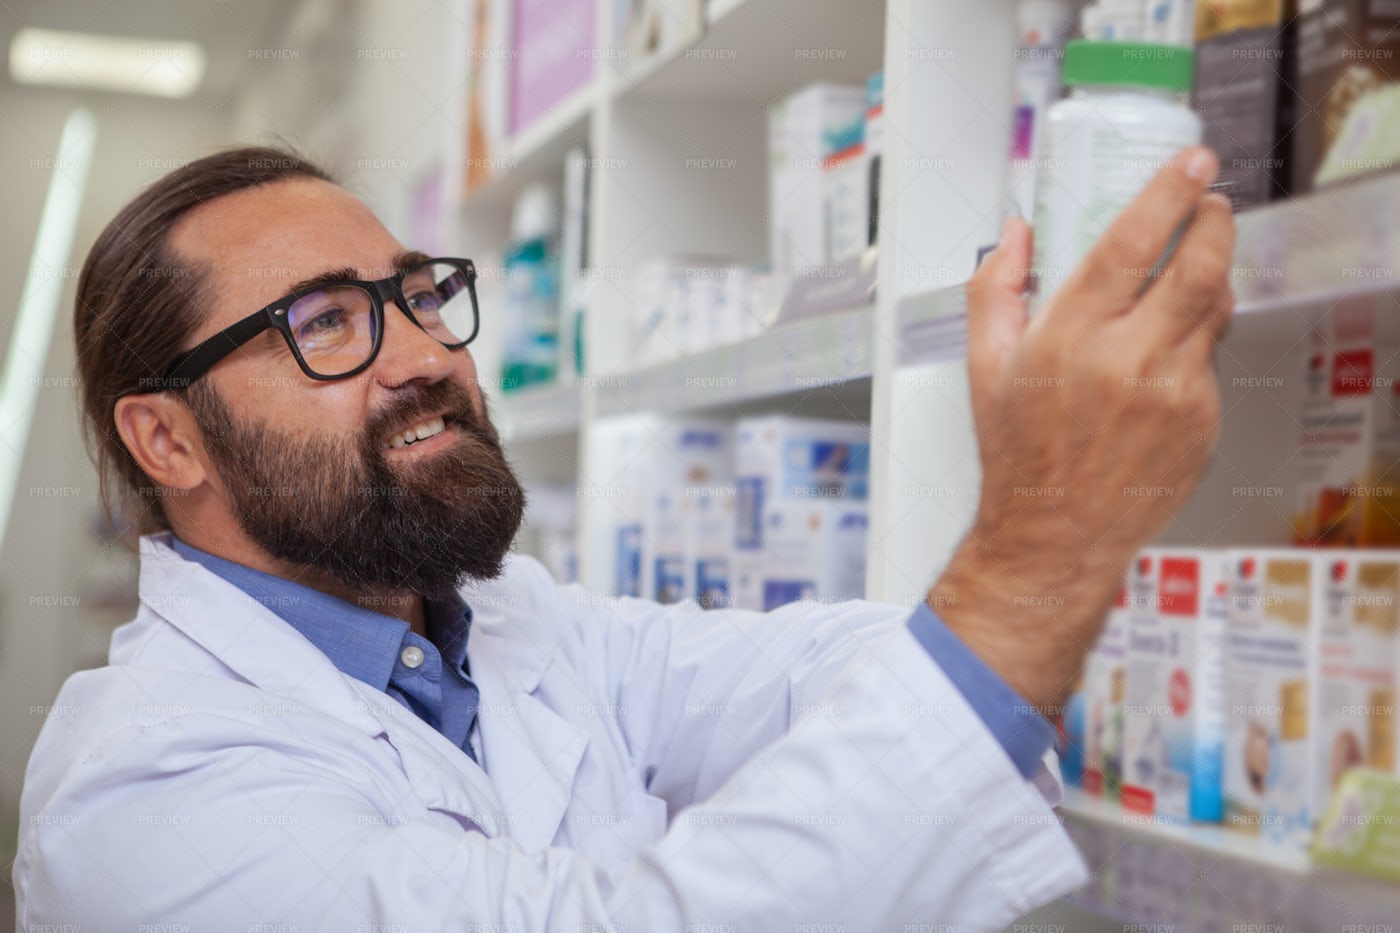 Taking Medication From The Shelf: Stock Photos